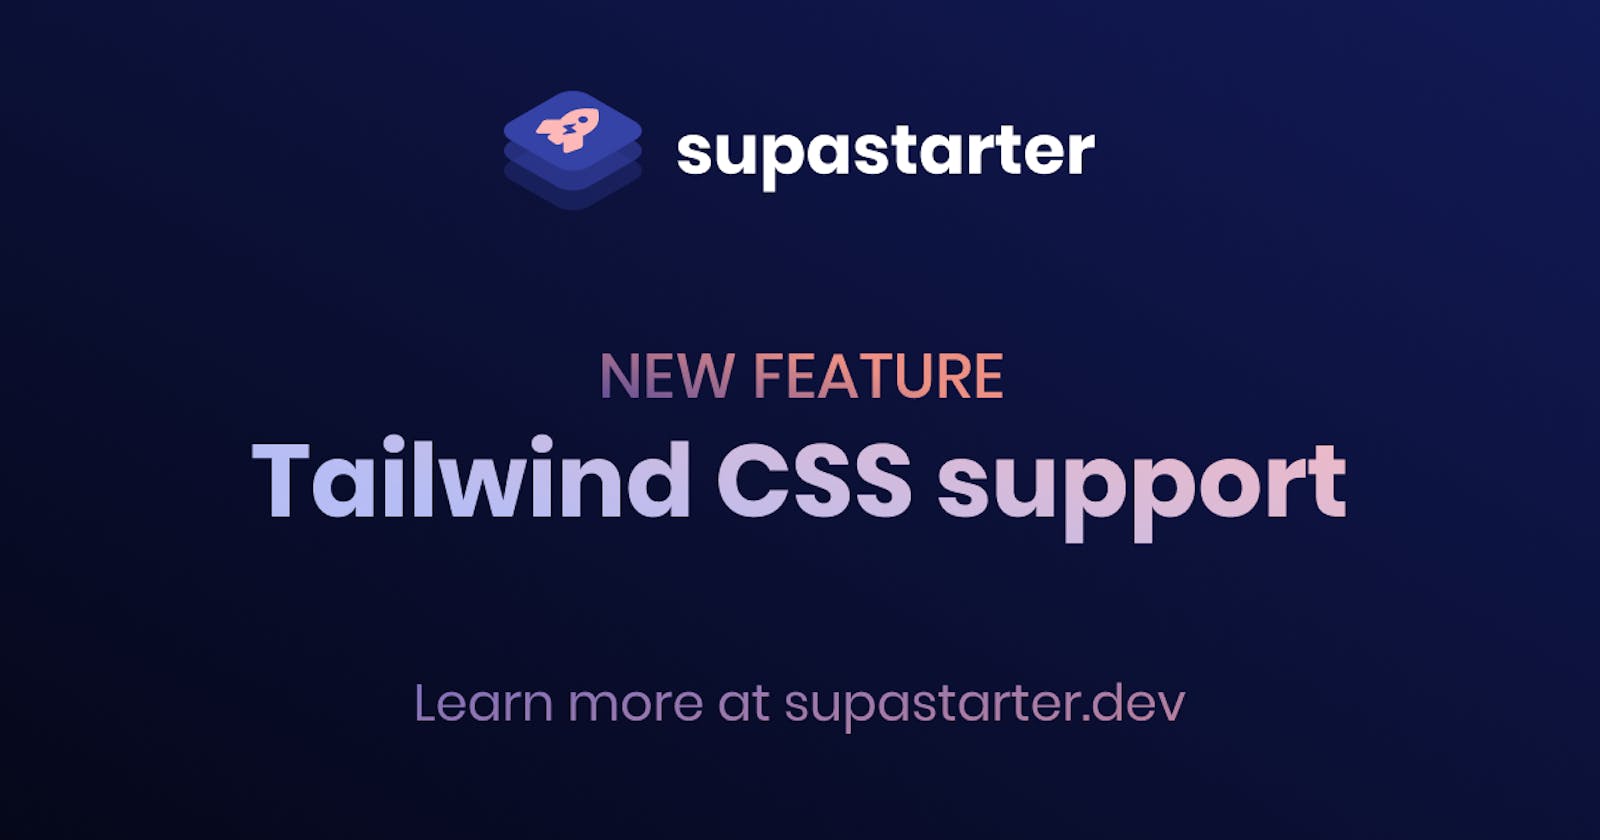 Introducing Tailwind CSS support for supastarter